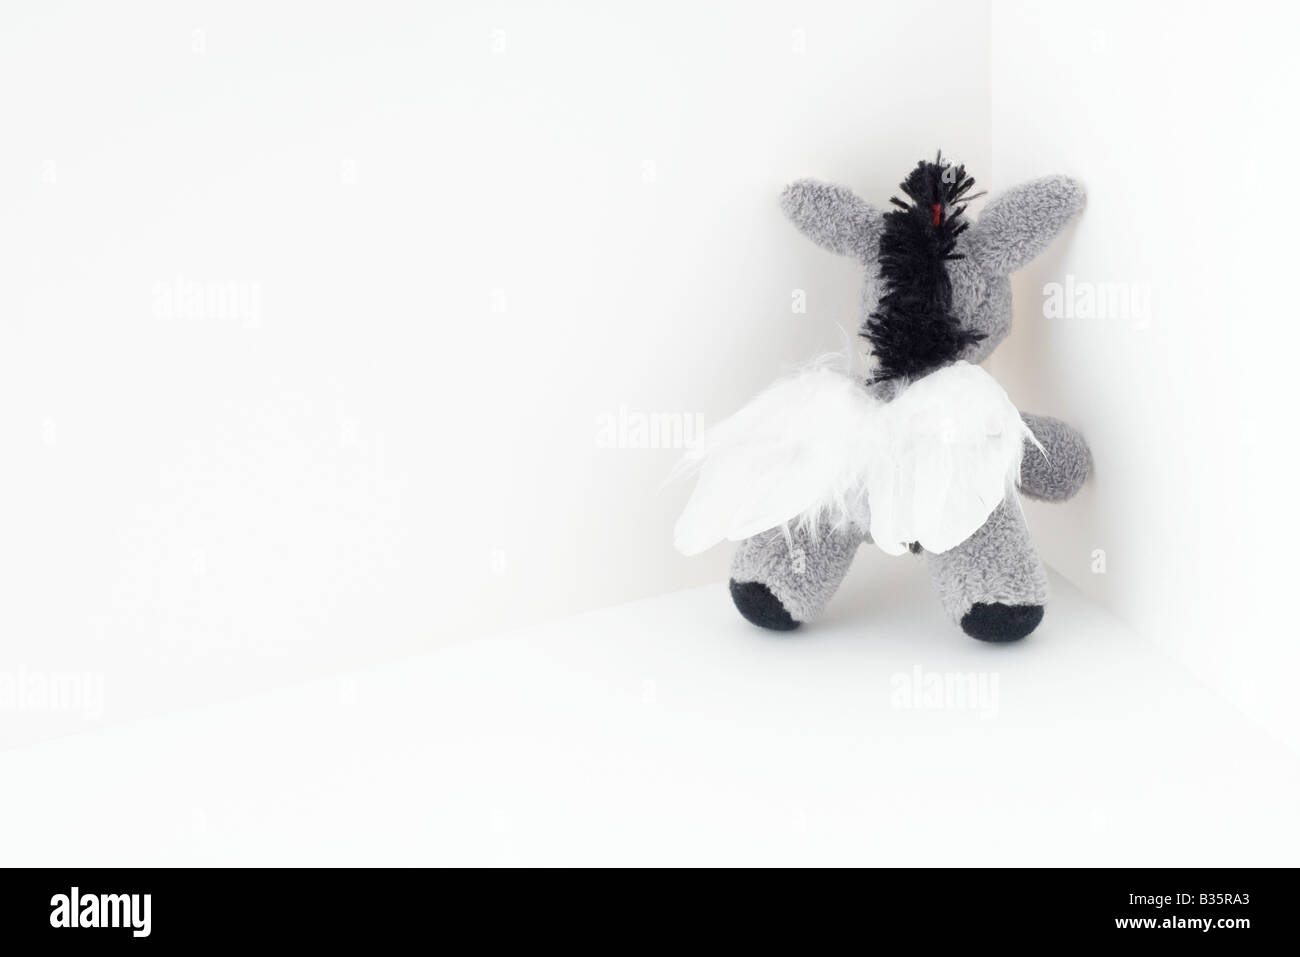 Stuffed elephant toy with wings, in the corner Stock Photo